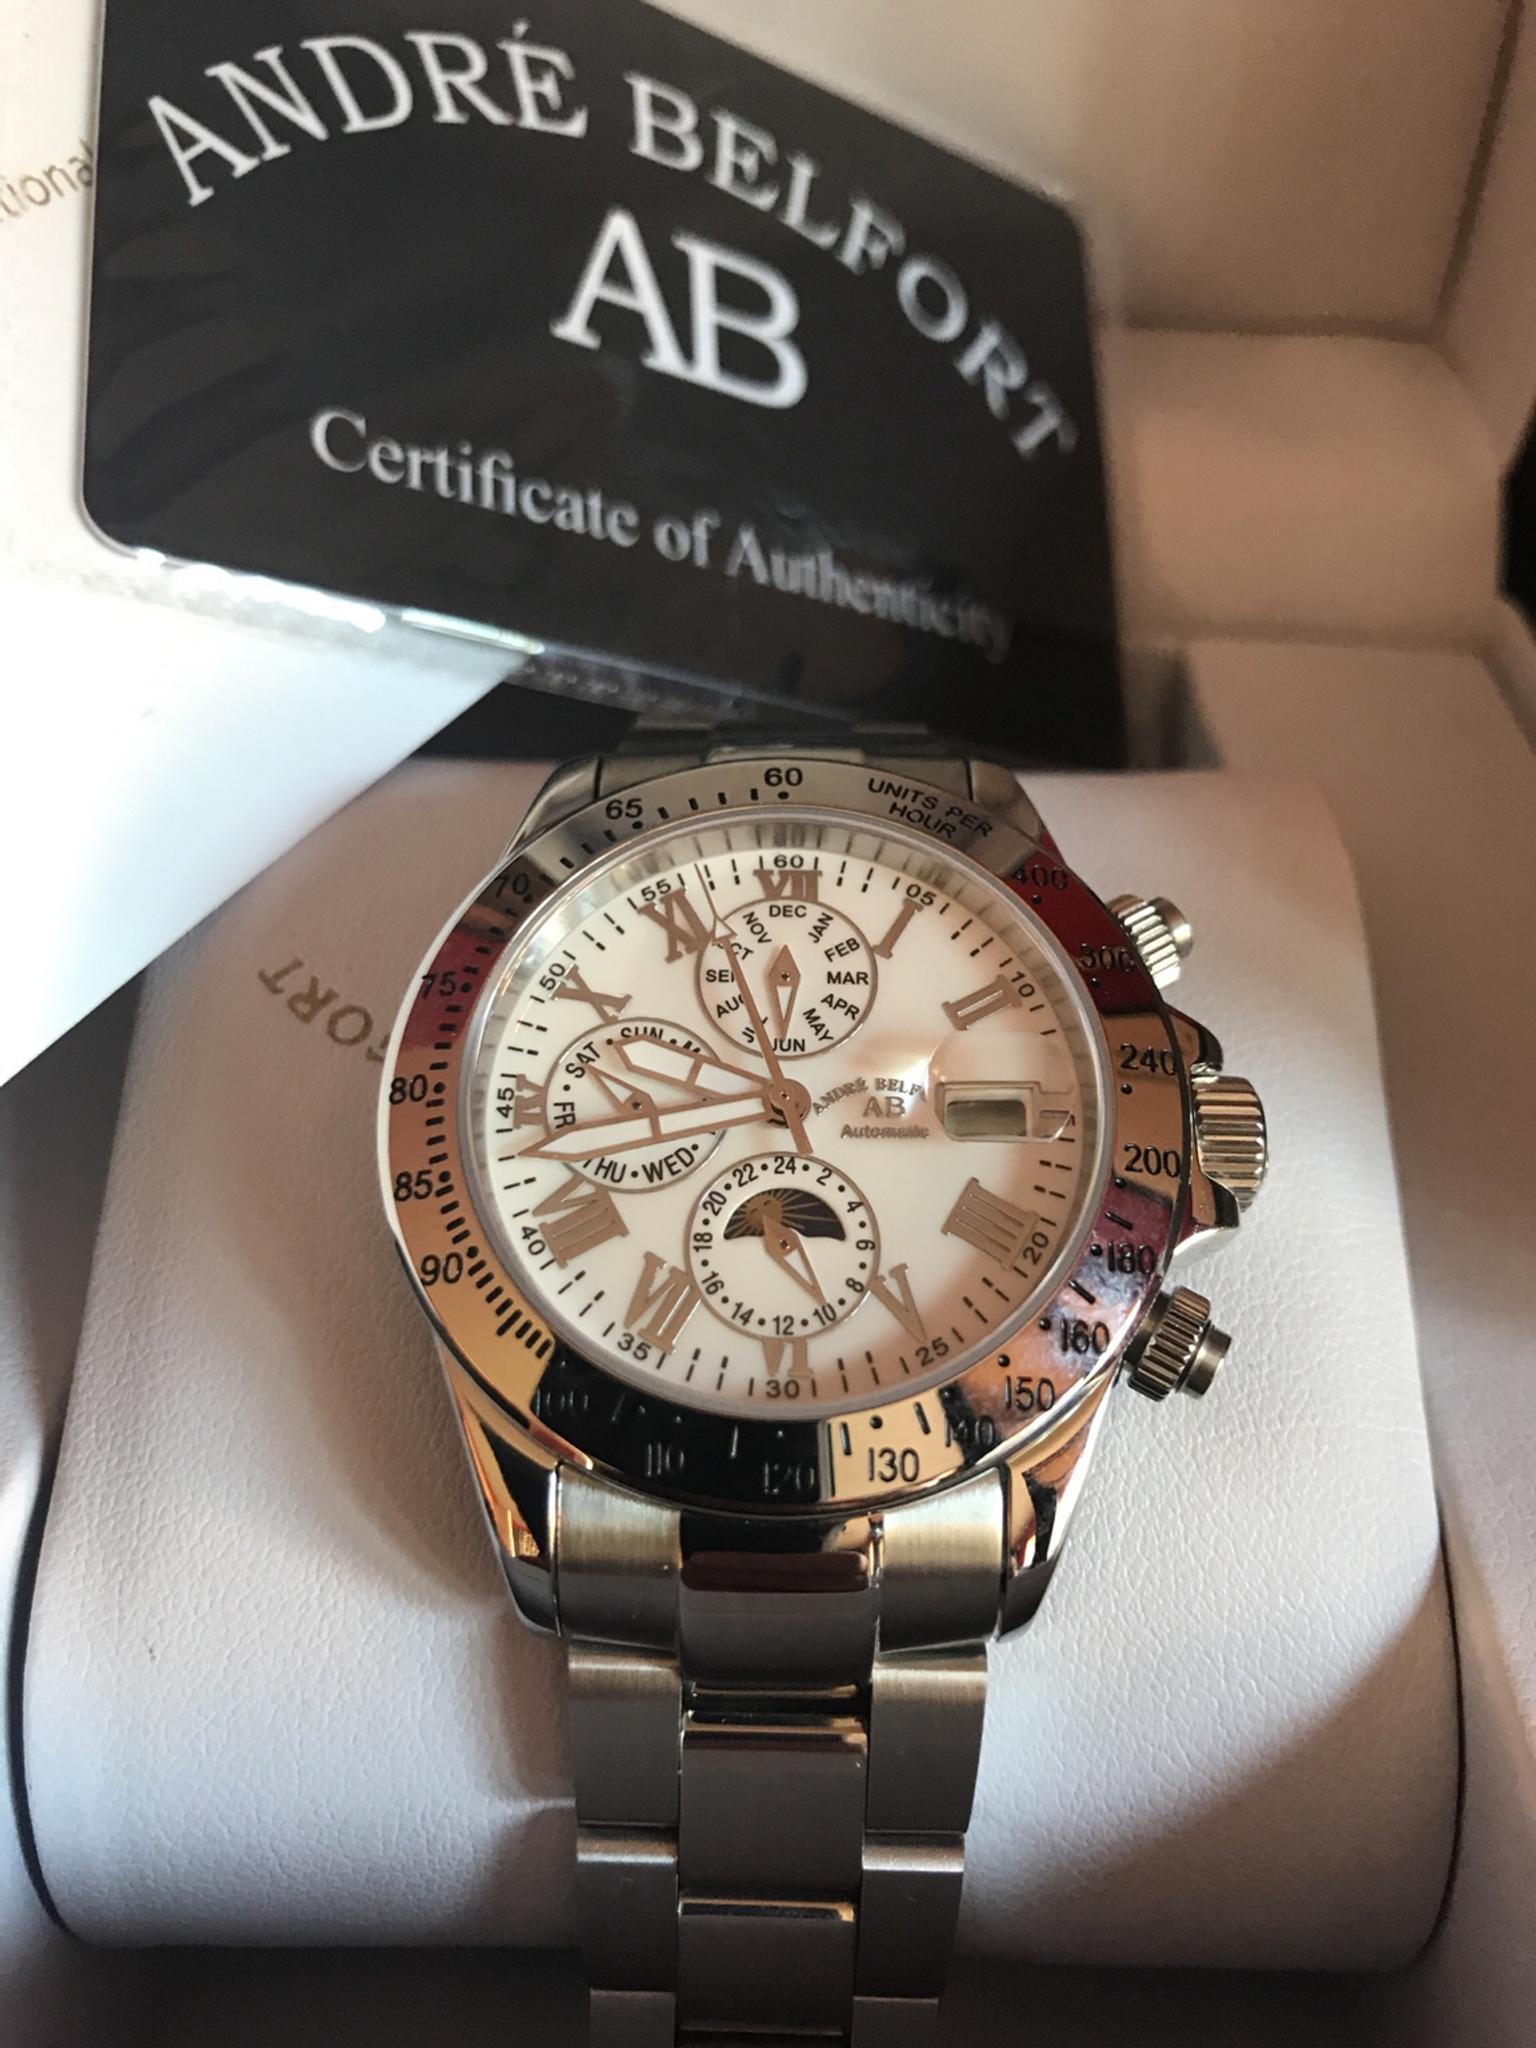 ANDRE BELFORT SWISS AUTOMATIC WATCH in NG6 Nottingham for £95.00 for ...